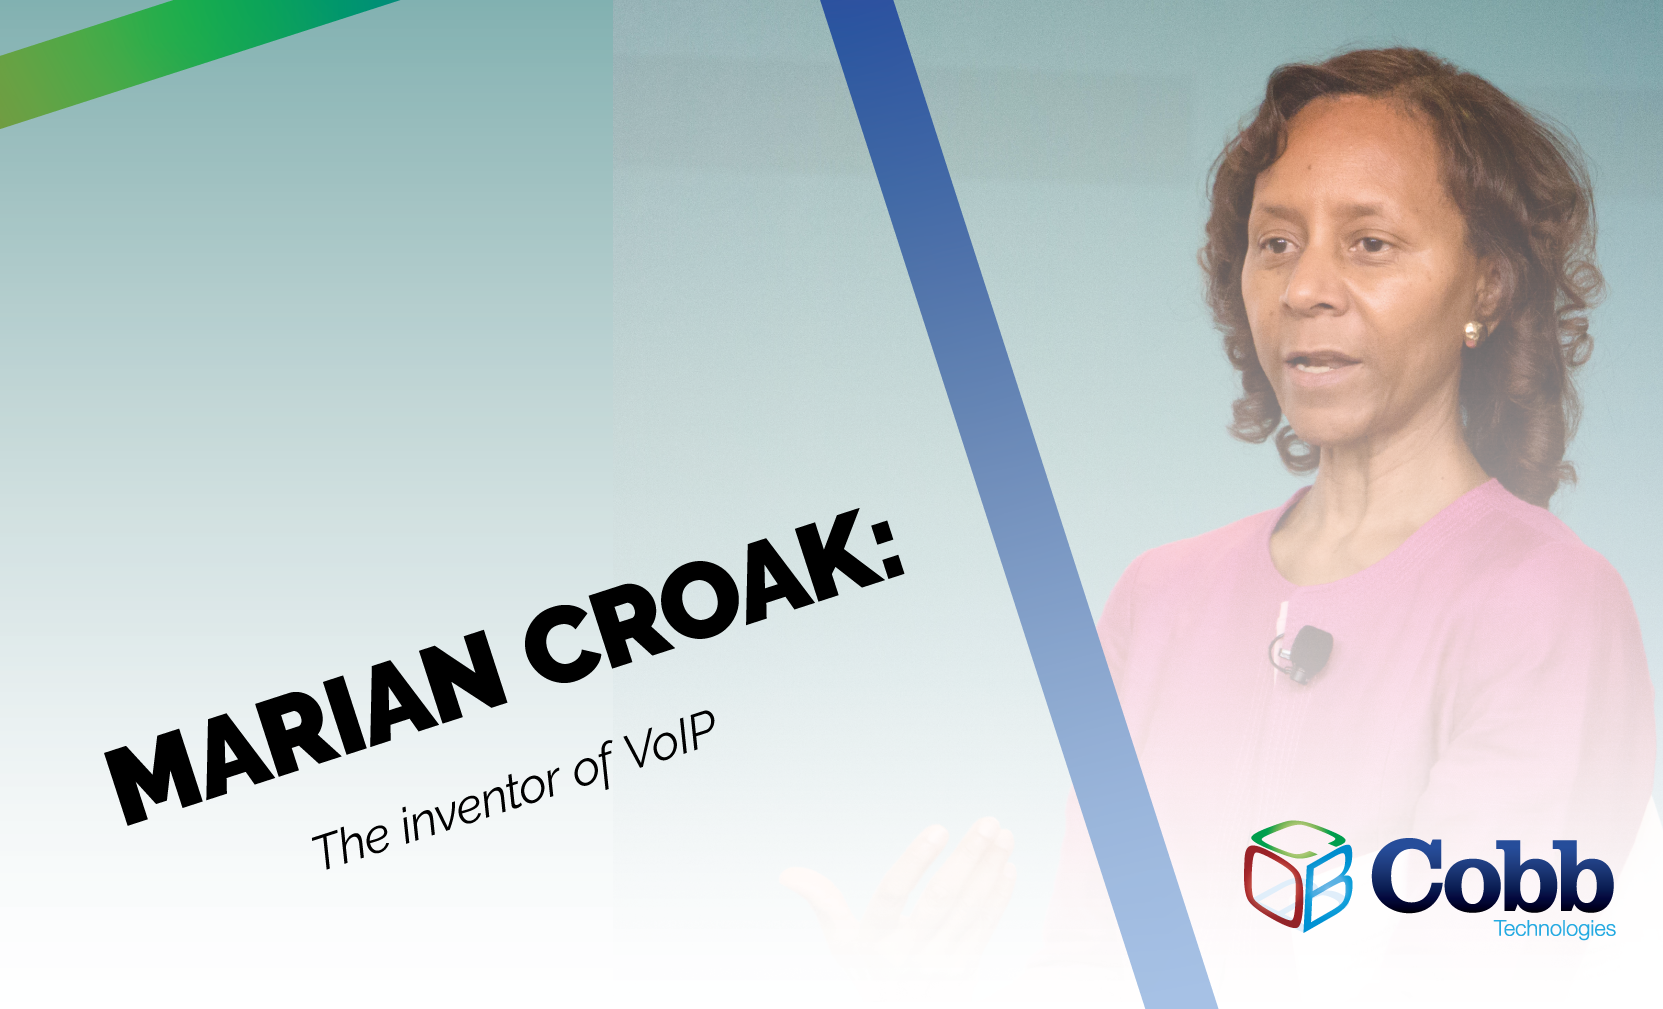 The Inventor of VoIP - Marian Croak